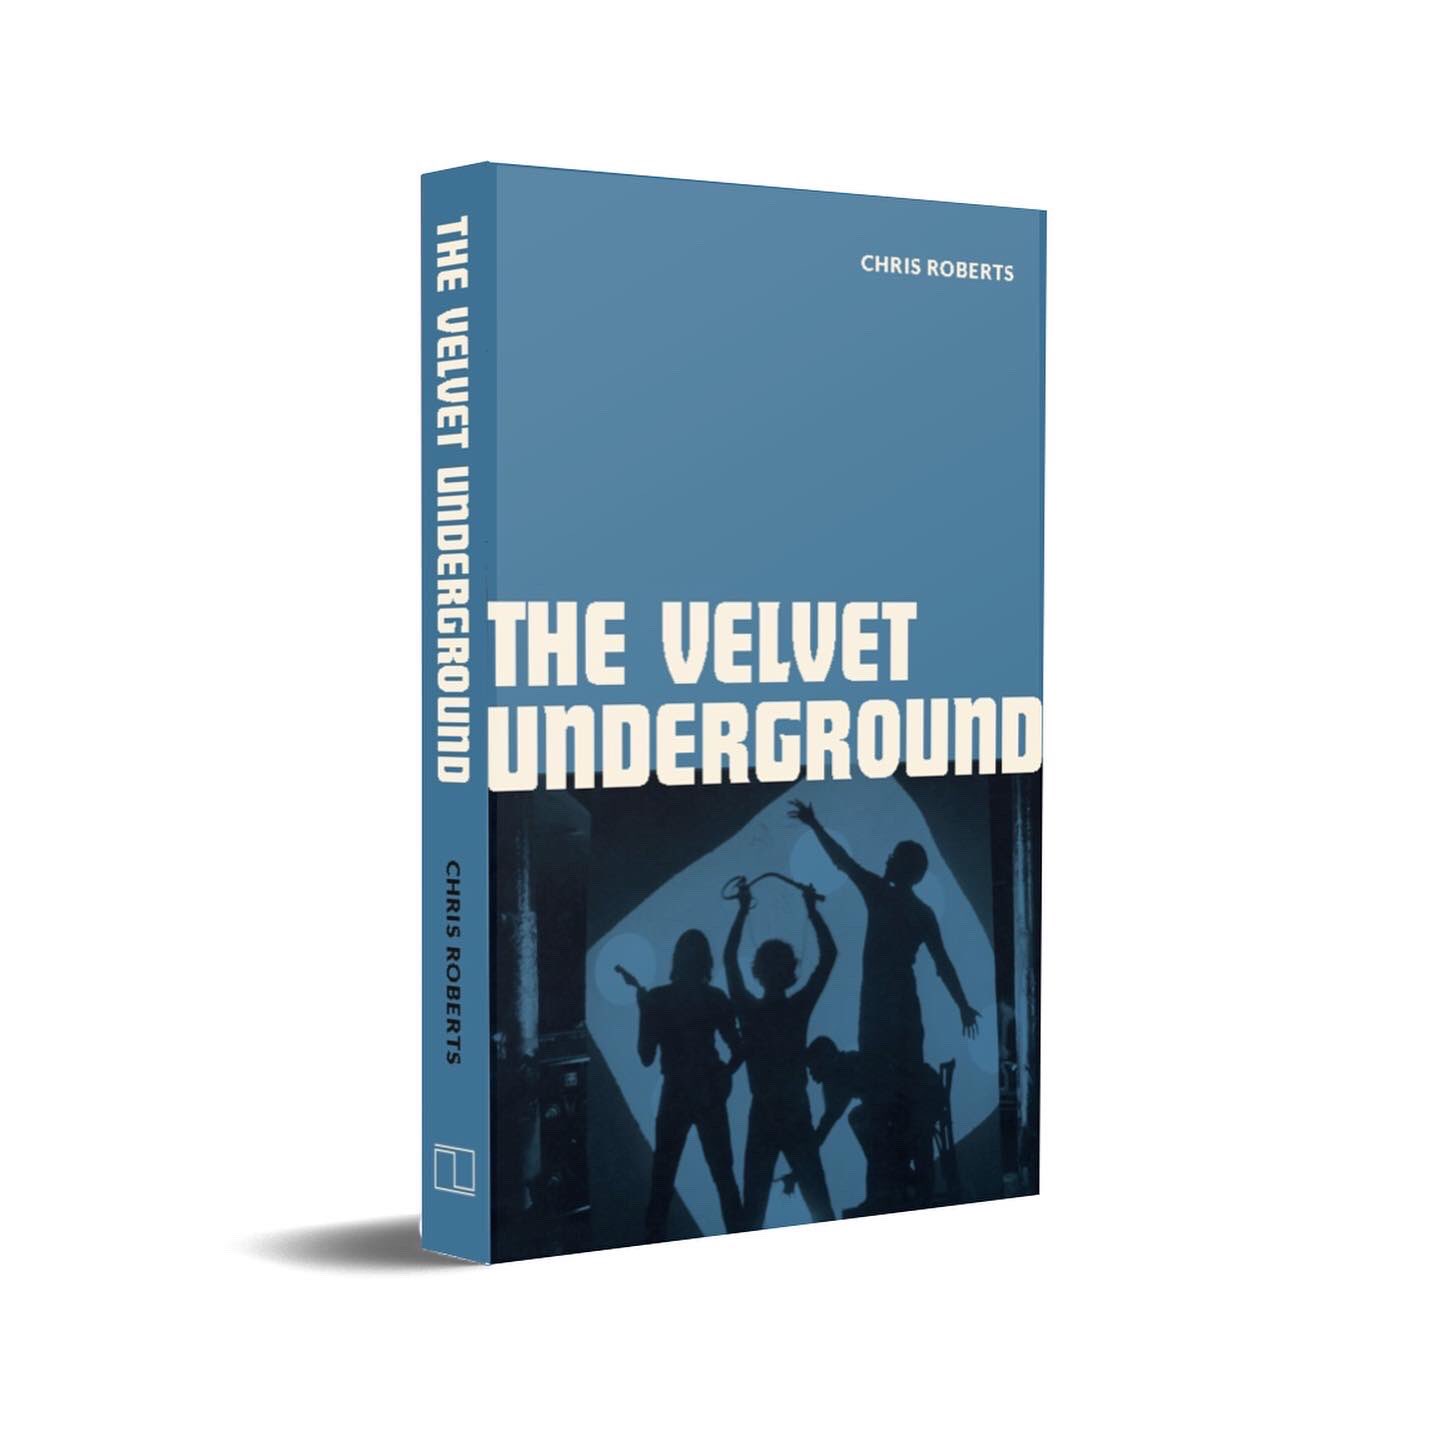 BOOK REVIEW: The Velvet Underground by Chris Roberts